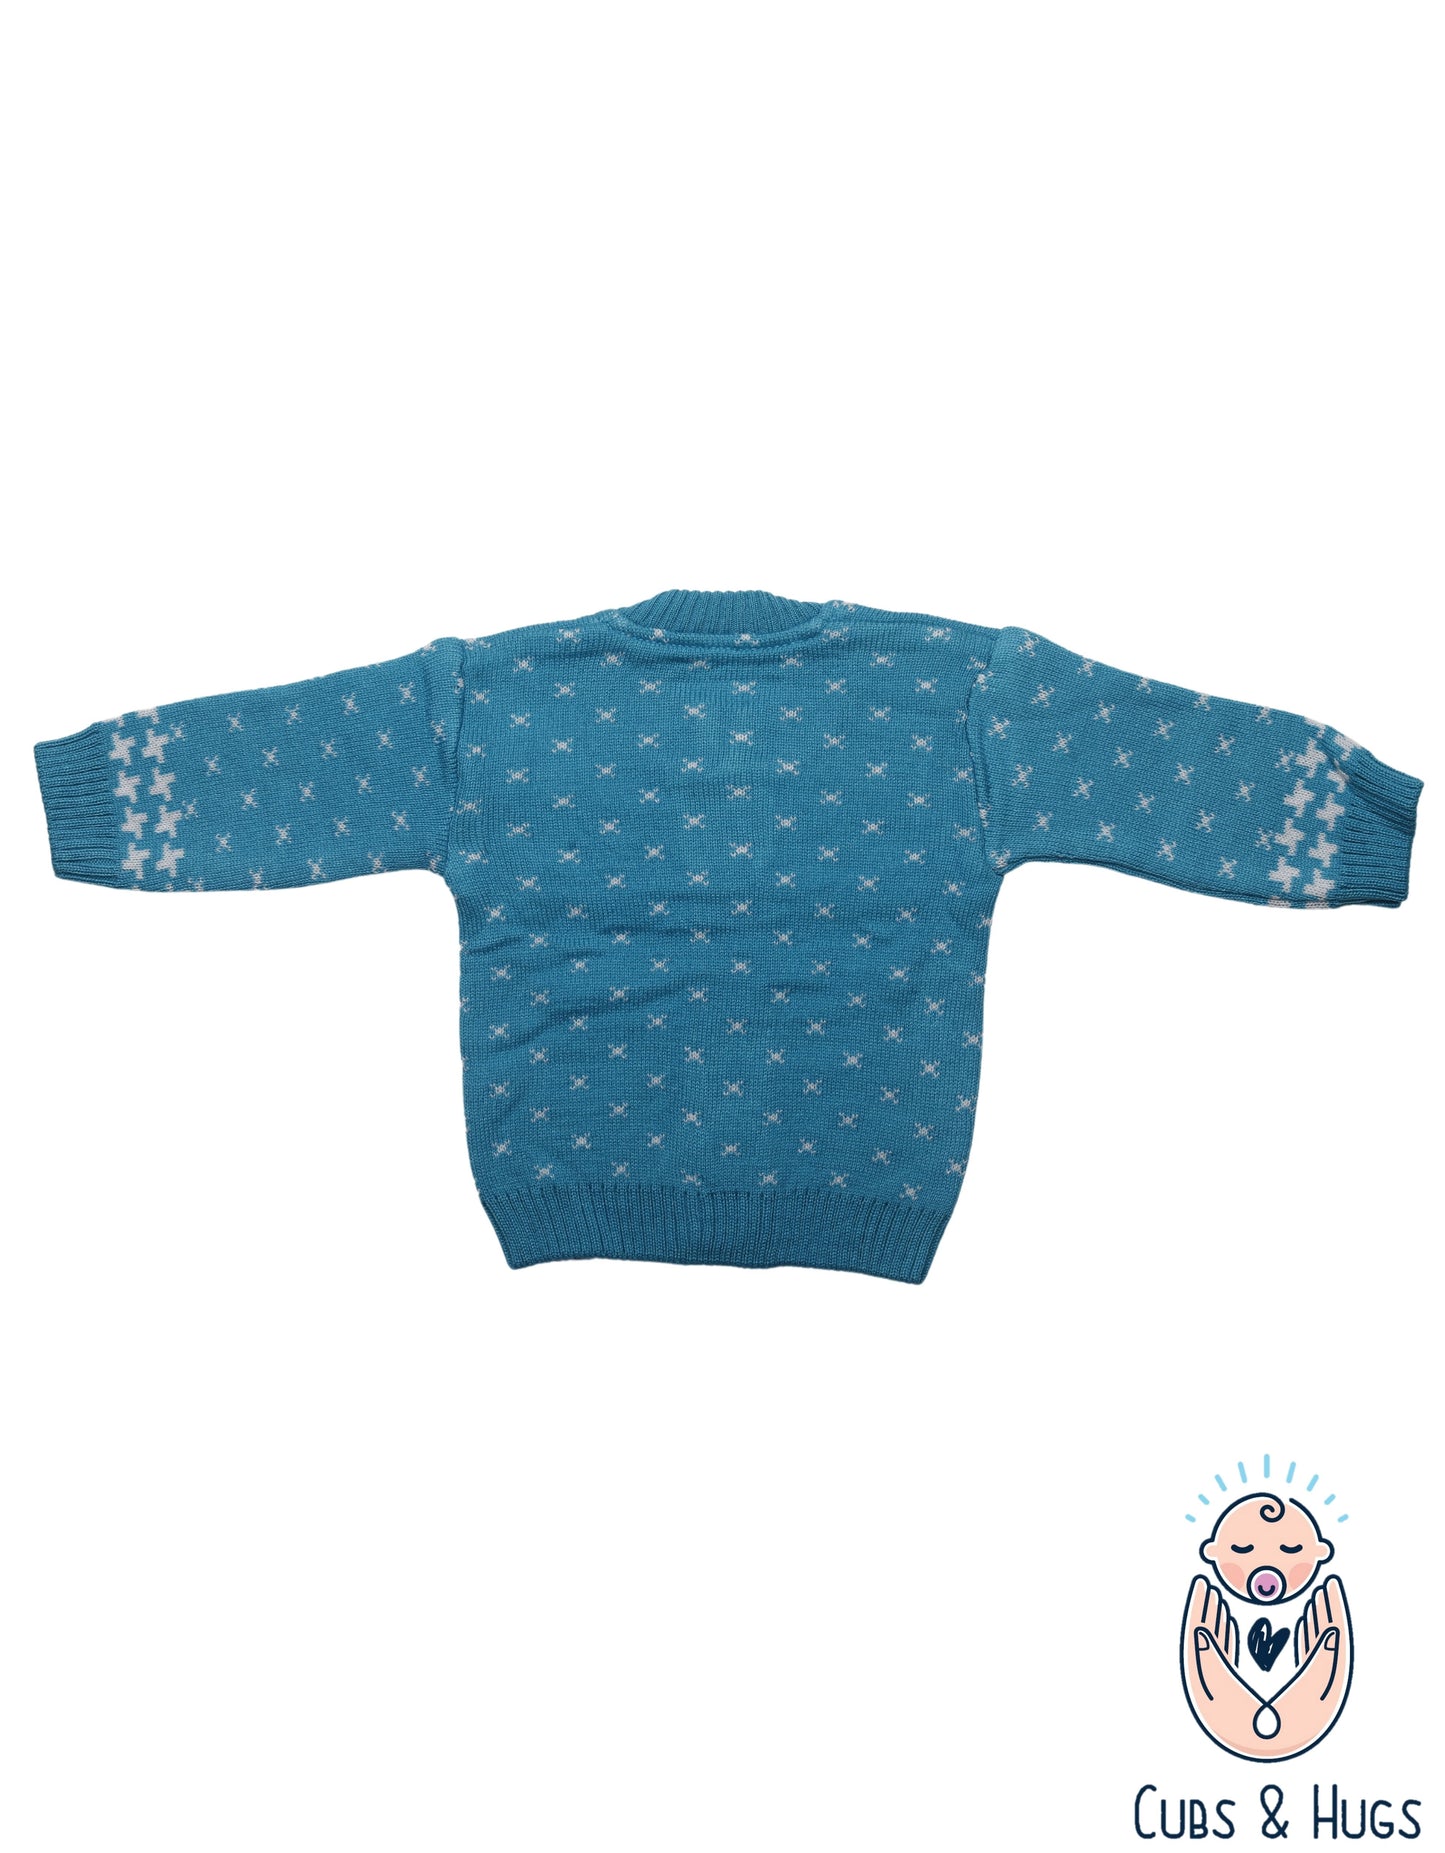 CUBS & HUGS Baby Girls Boys Woolen Round Neck Cardigan Sweater-Turquoise